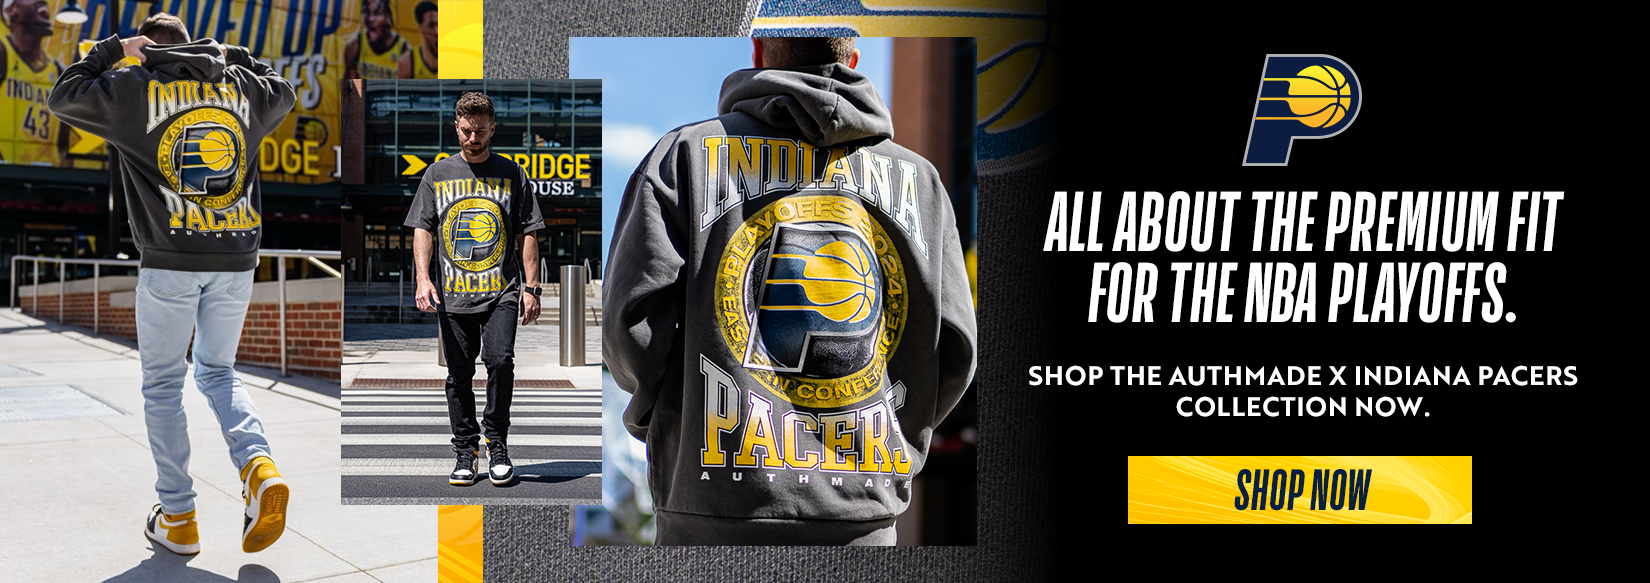 All About The Premium Fit For The NBA Playoffs. Shop the Authmade x Indiana Pacers collection now. SHOP NOW